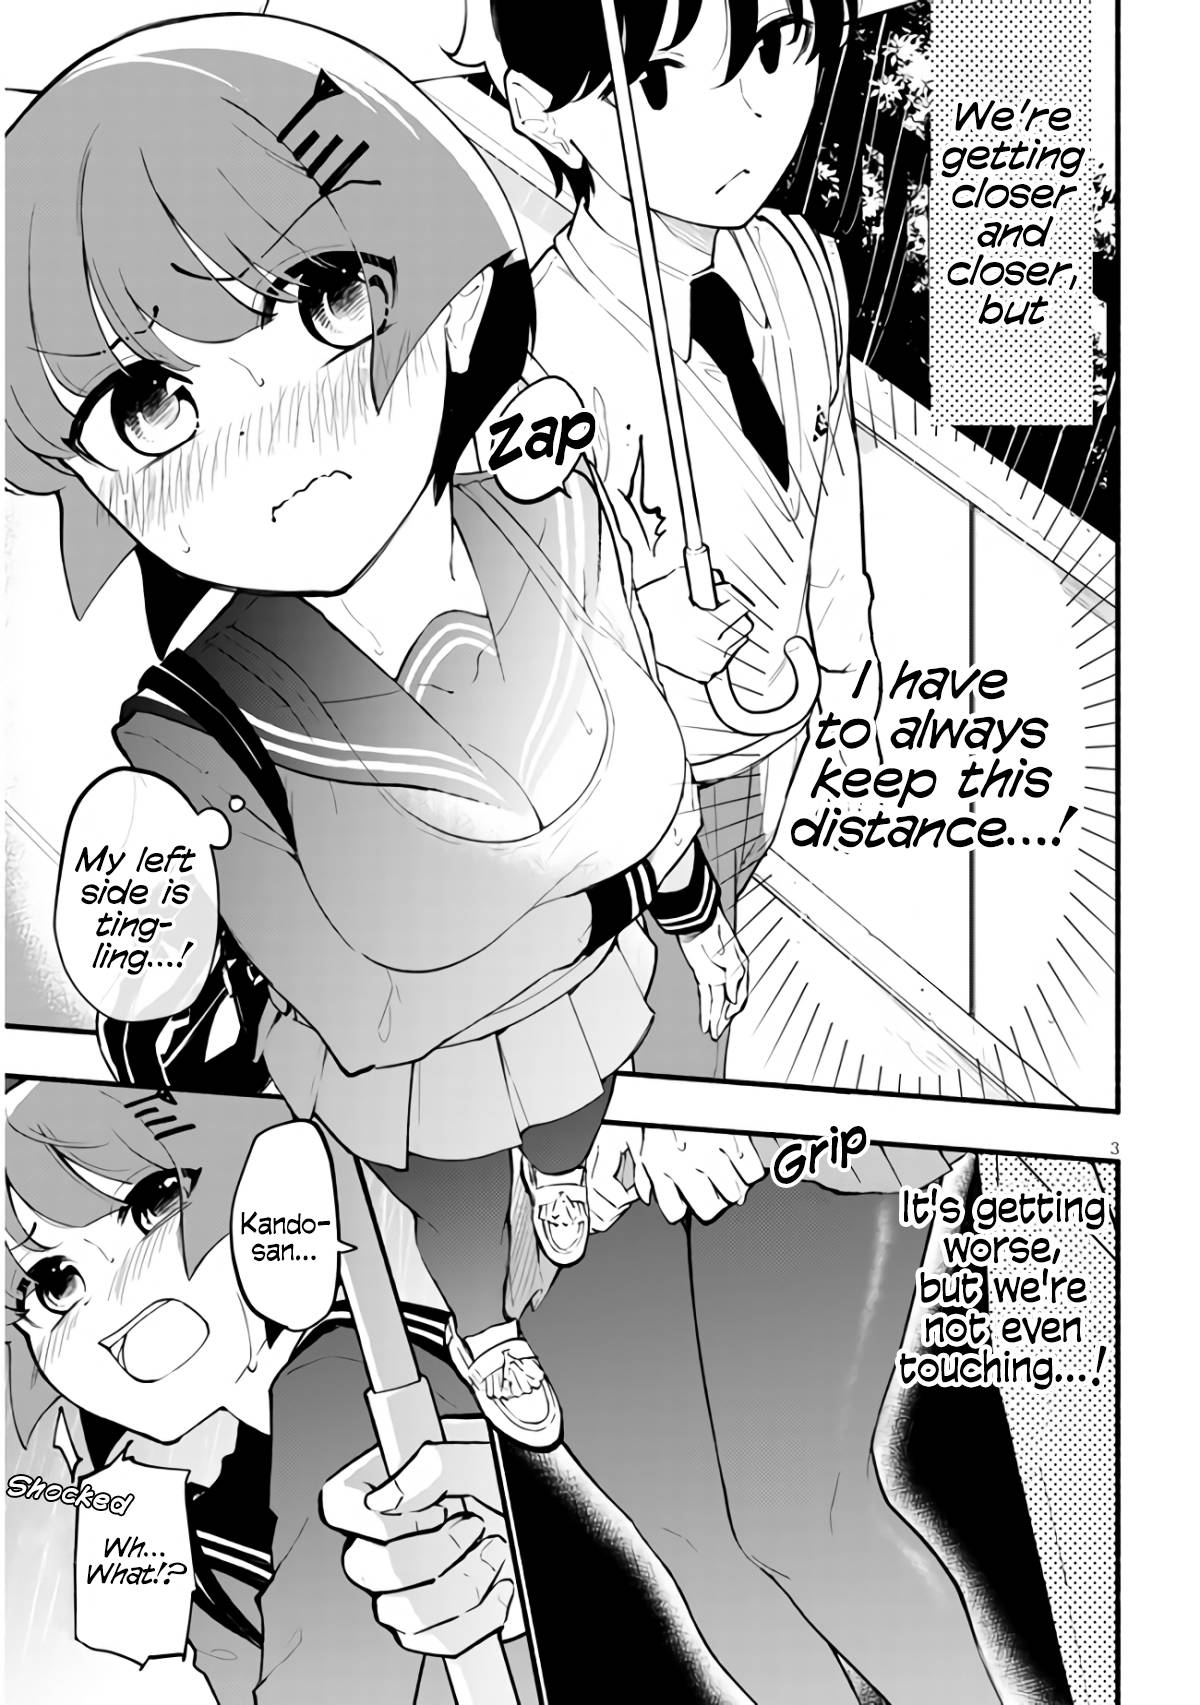 Don't touch Kando-chan! - chapter 5 - #3